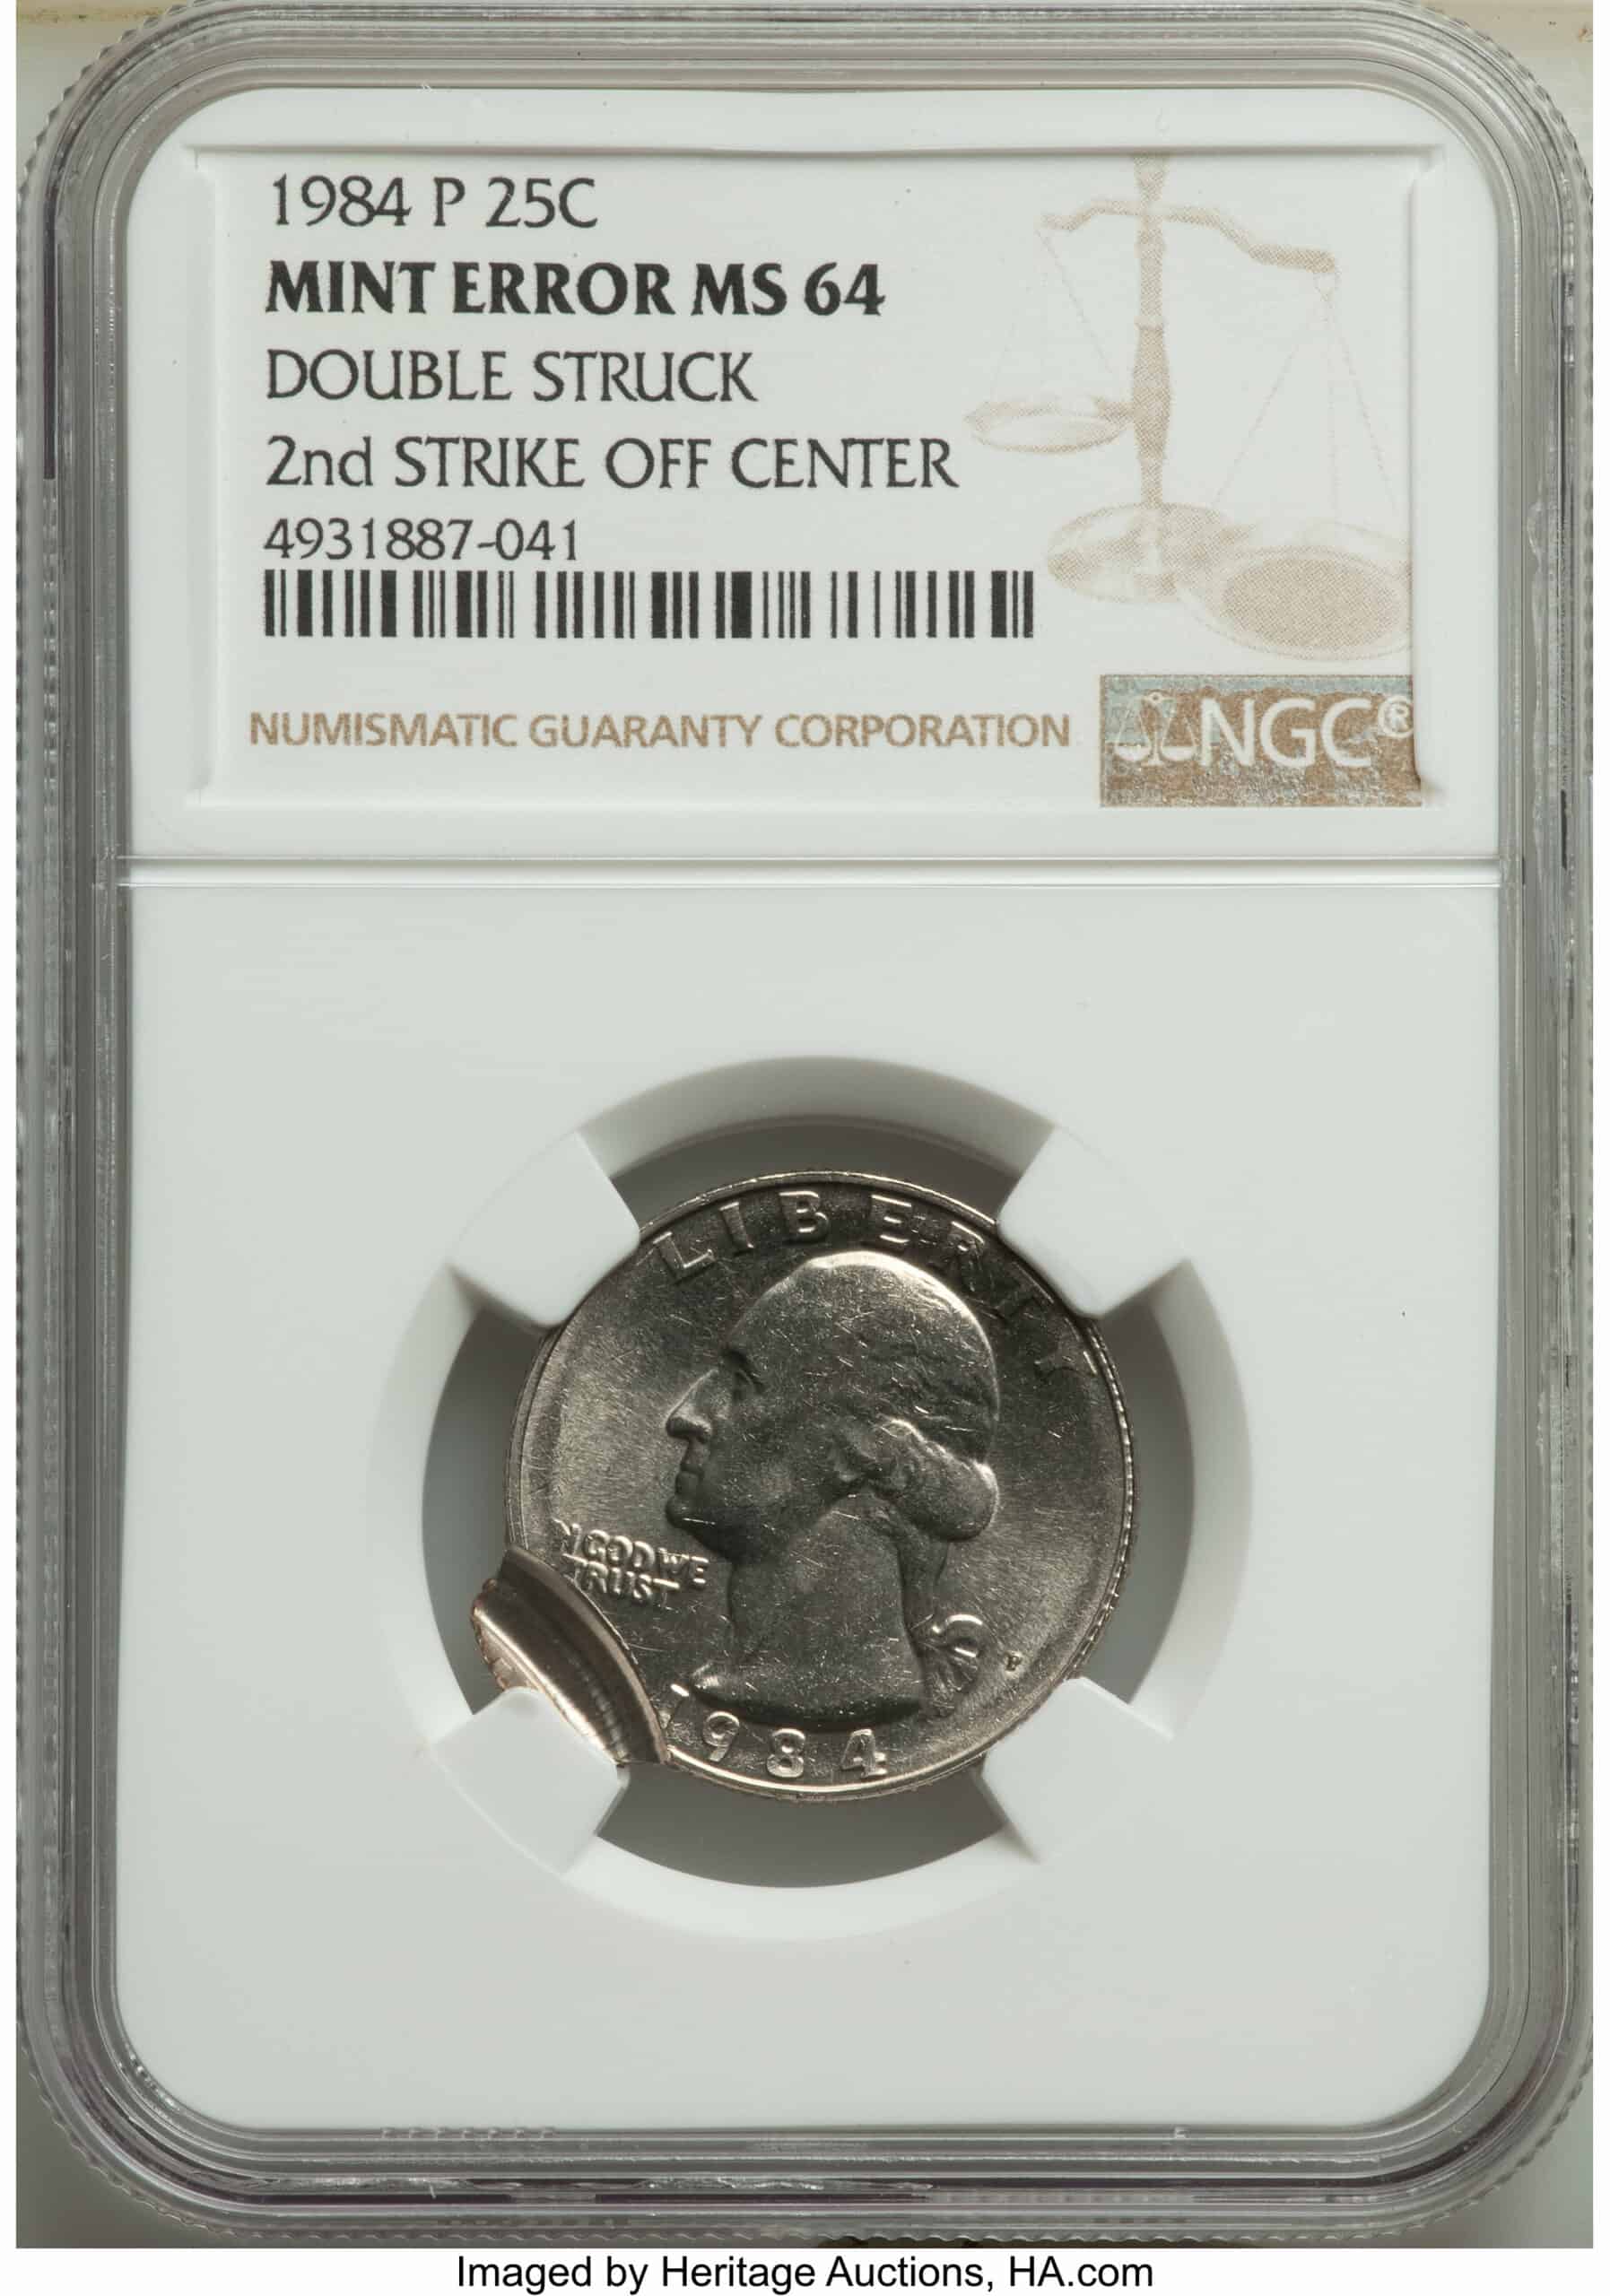 1984 Quarter Double Struck with Second Strike Off-center